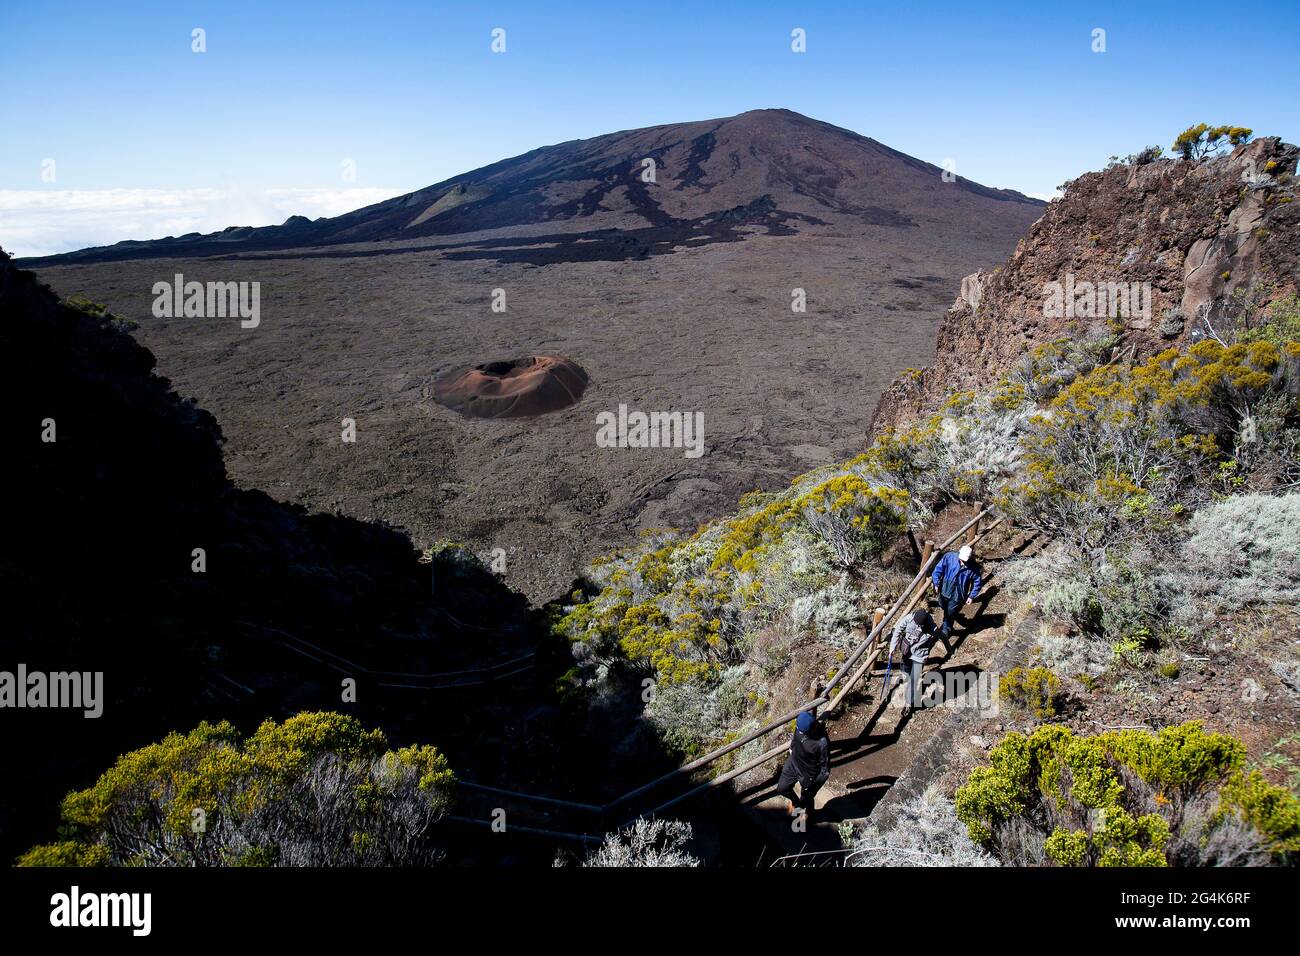 Reunion, “Piton de la Fournaise” volcano: the small volcanic crater Formica Leo viewed from the “Pas de Bellecombe” mountain pass Stock Photo